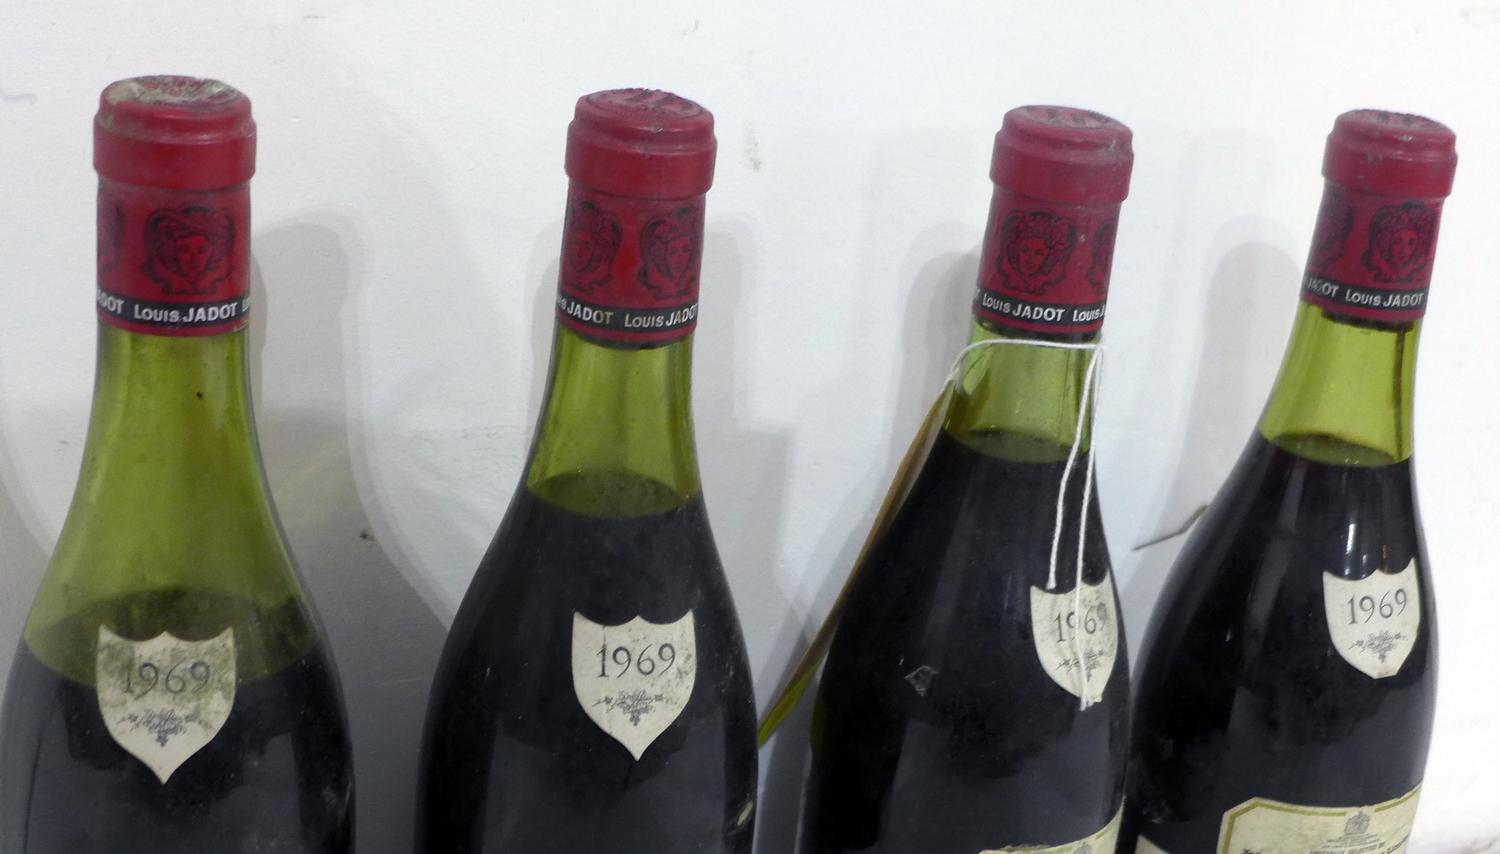 Chambolle-Musigny, Domain Louis Jardot 1969, 75cl, 4 bottles - Image 3 of 3